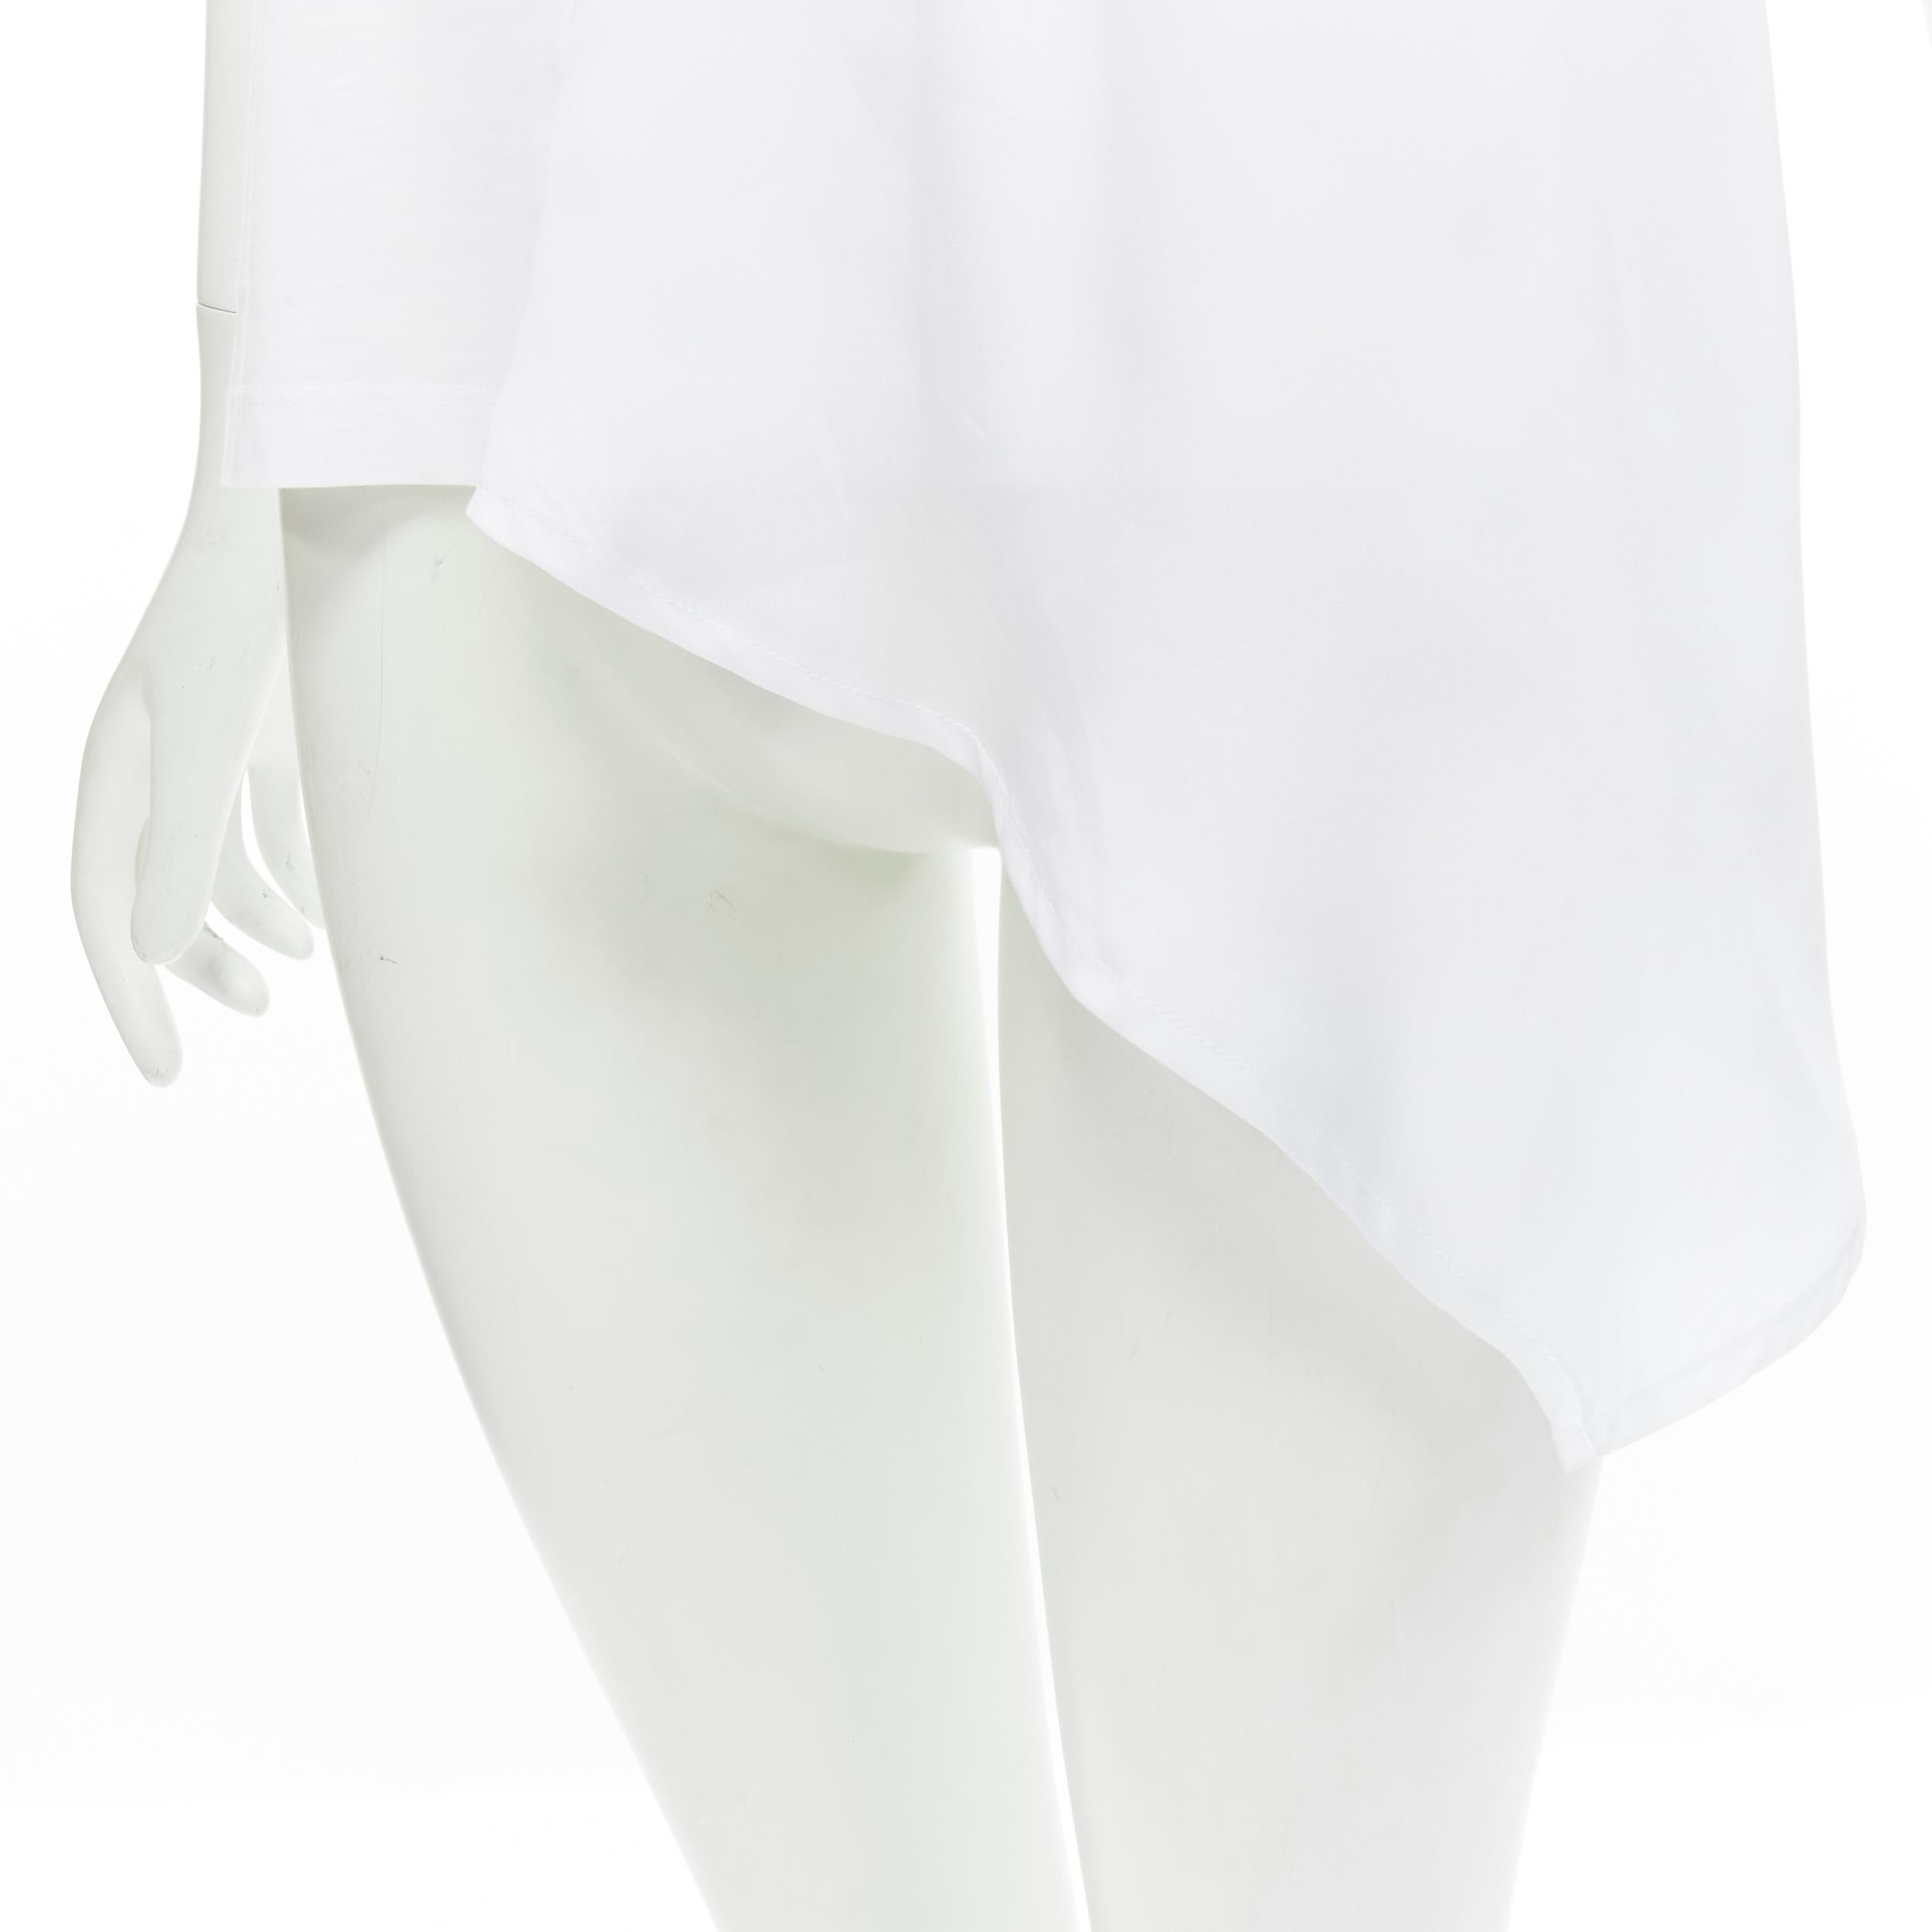 VVB VICTORIA BECKHAM 100% cotton polyester insert asymmetric t-shirt S 
Reference: CECU/A00014 
Brand: Victoria Victoria Beckham 
Material: Cotton 
Color: White 
Pattern: Solid 
Extra Detail: Crew Neck. Pleat shoulder. Insert polyester panel. 
Made